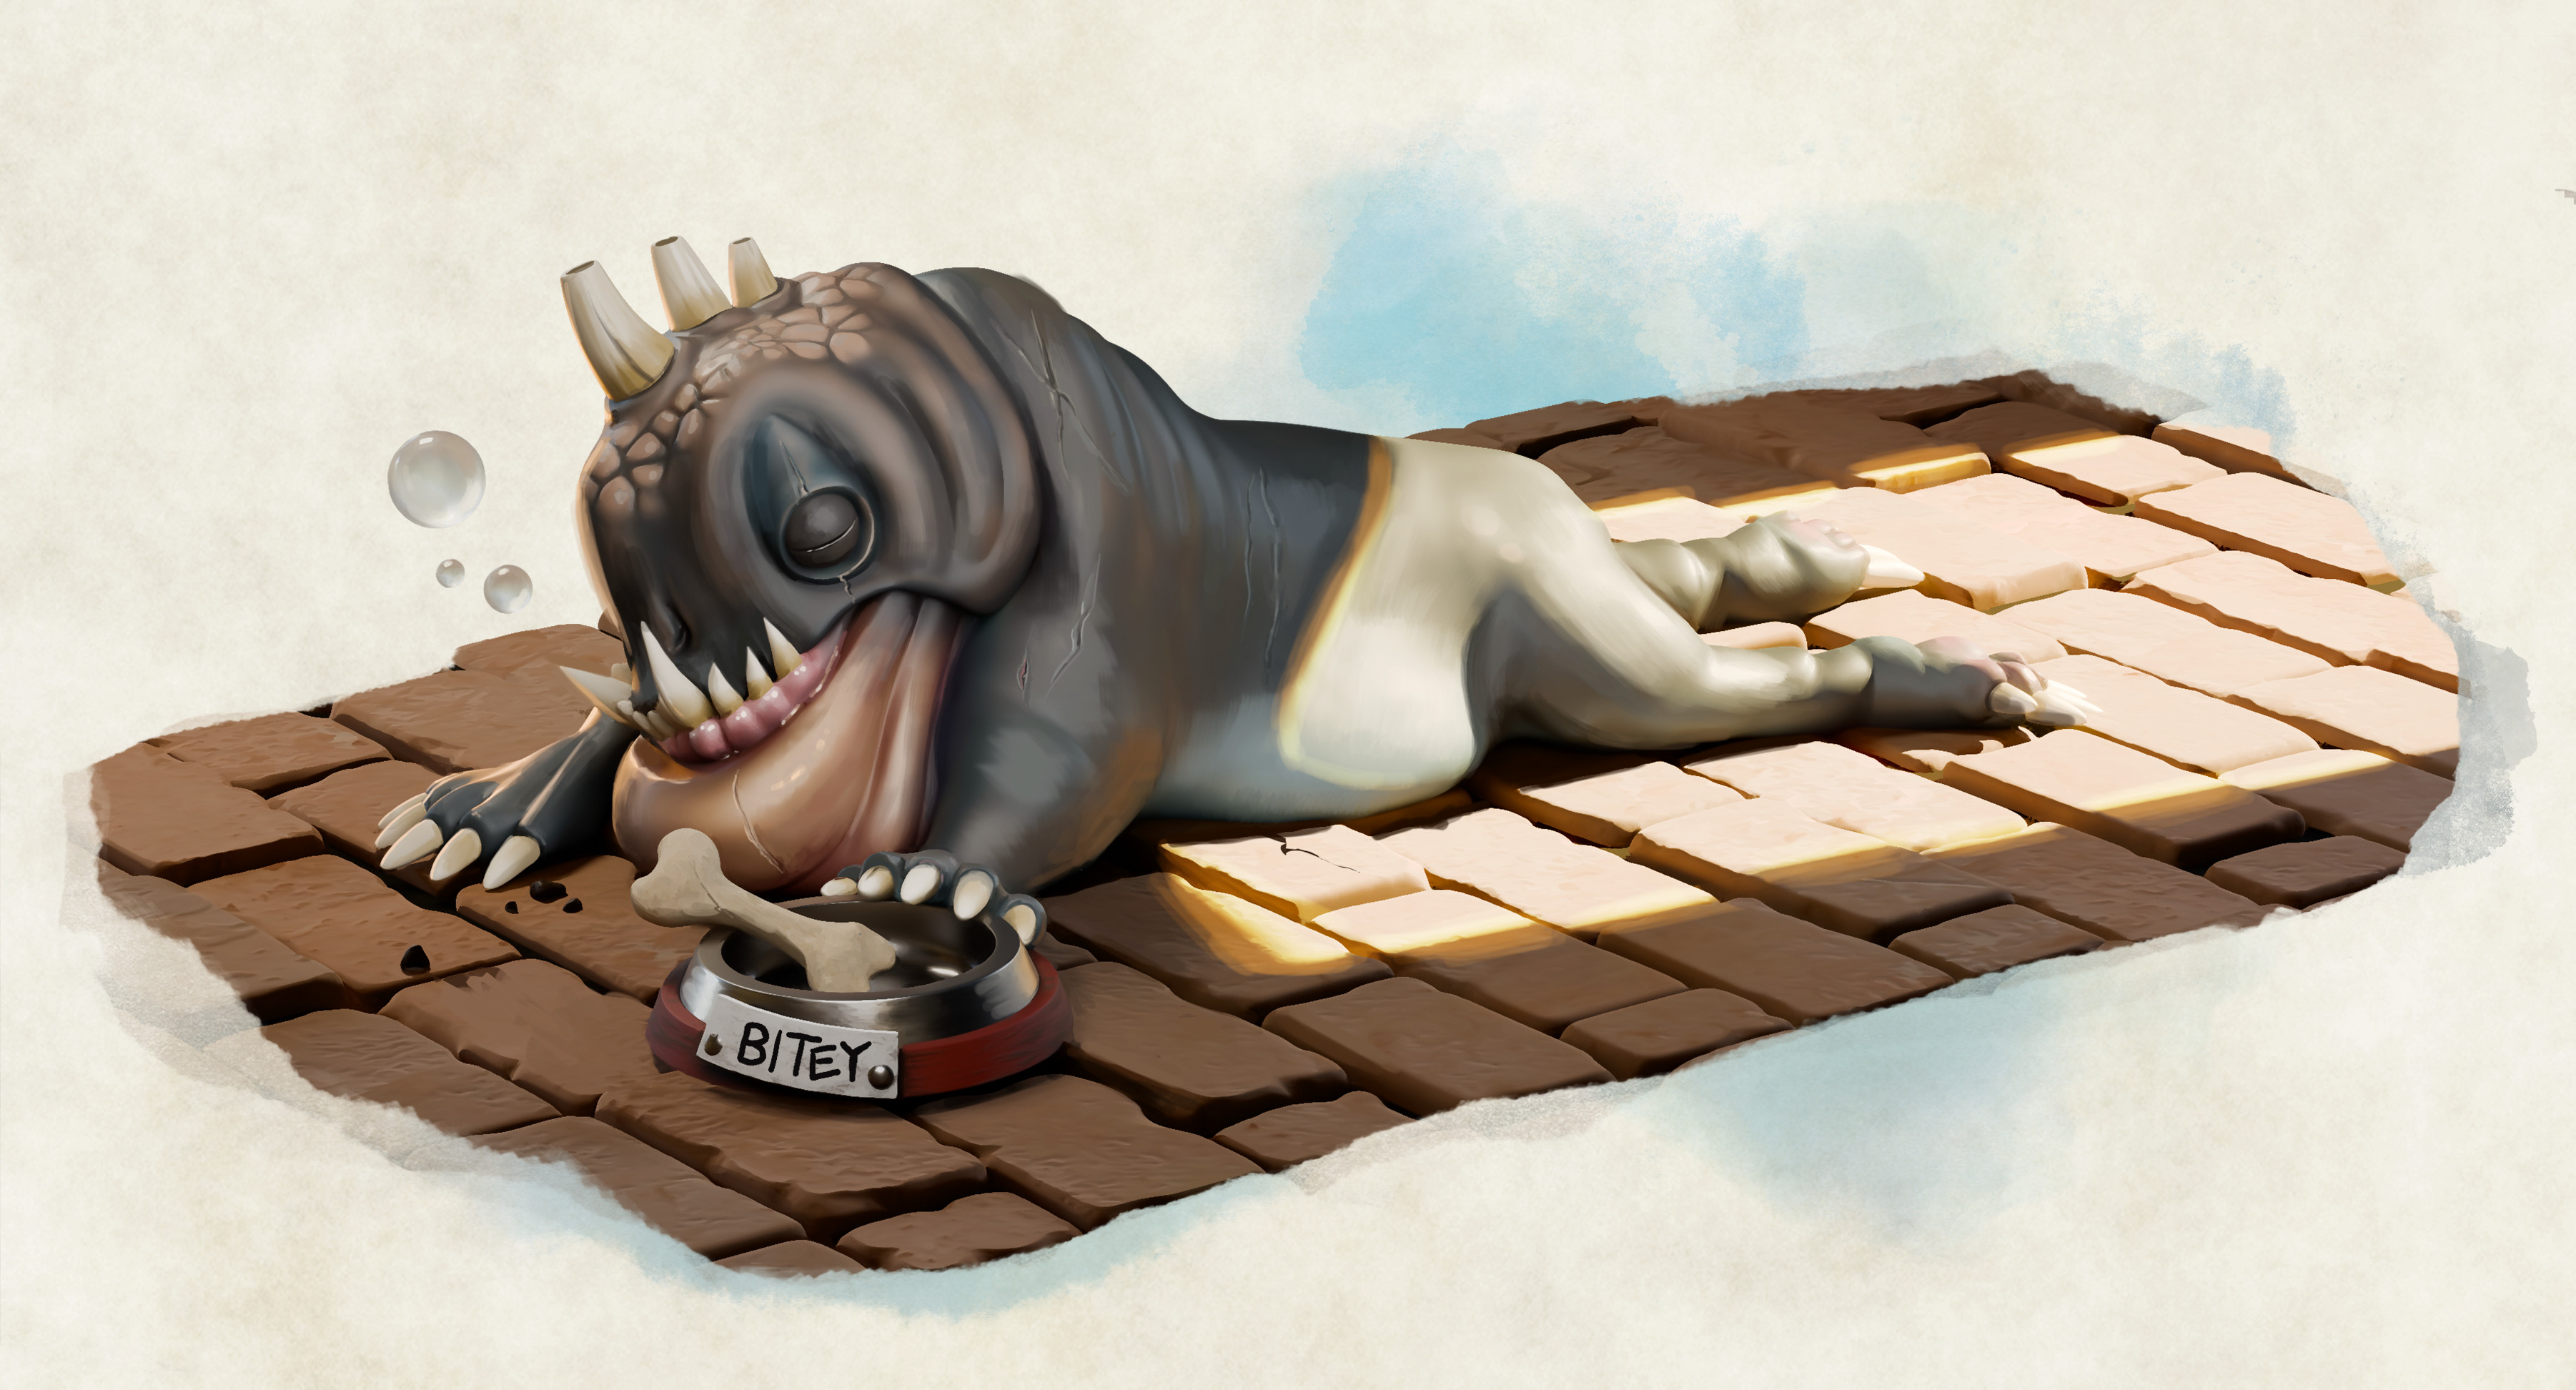 A artwork I did for the D&amp;D adventure "The Rats in the Cellar". This is a named tshumbla: Bitey.